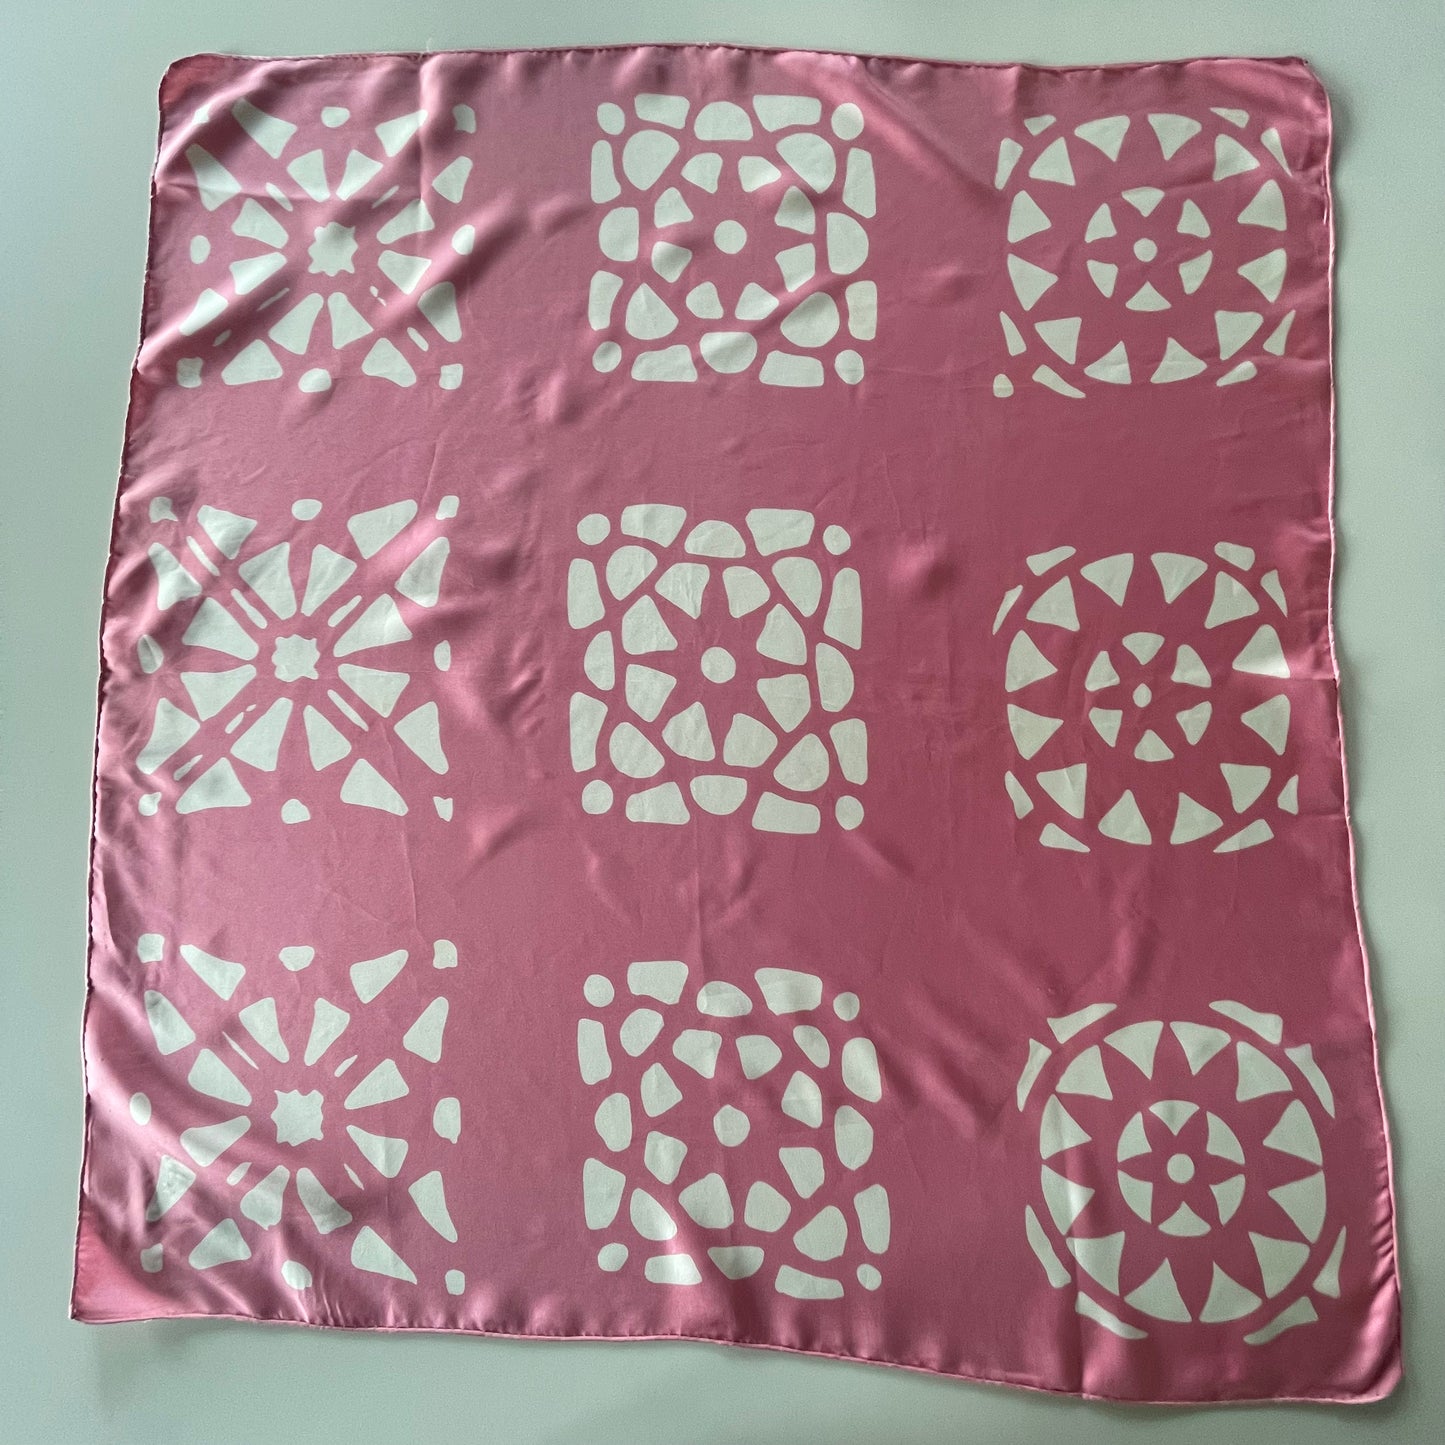 Vintage Scarf Square in Pink and White